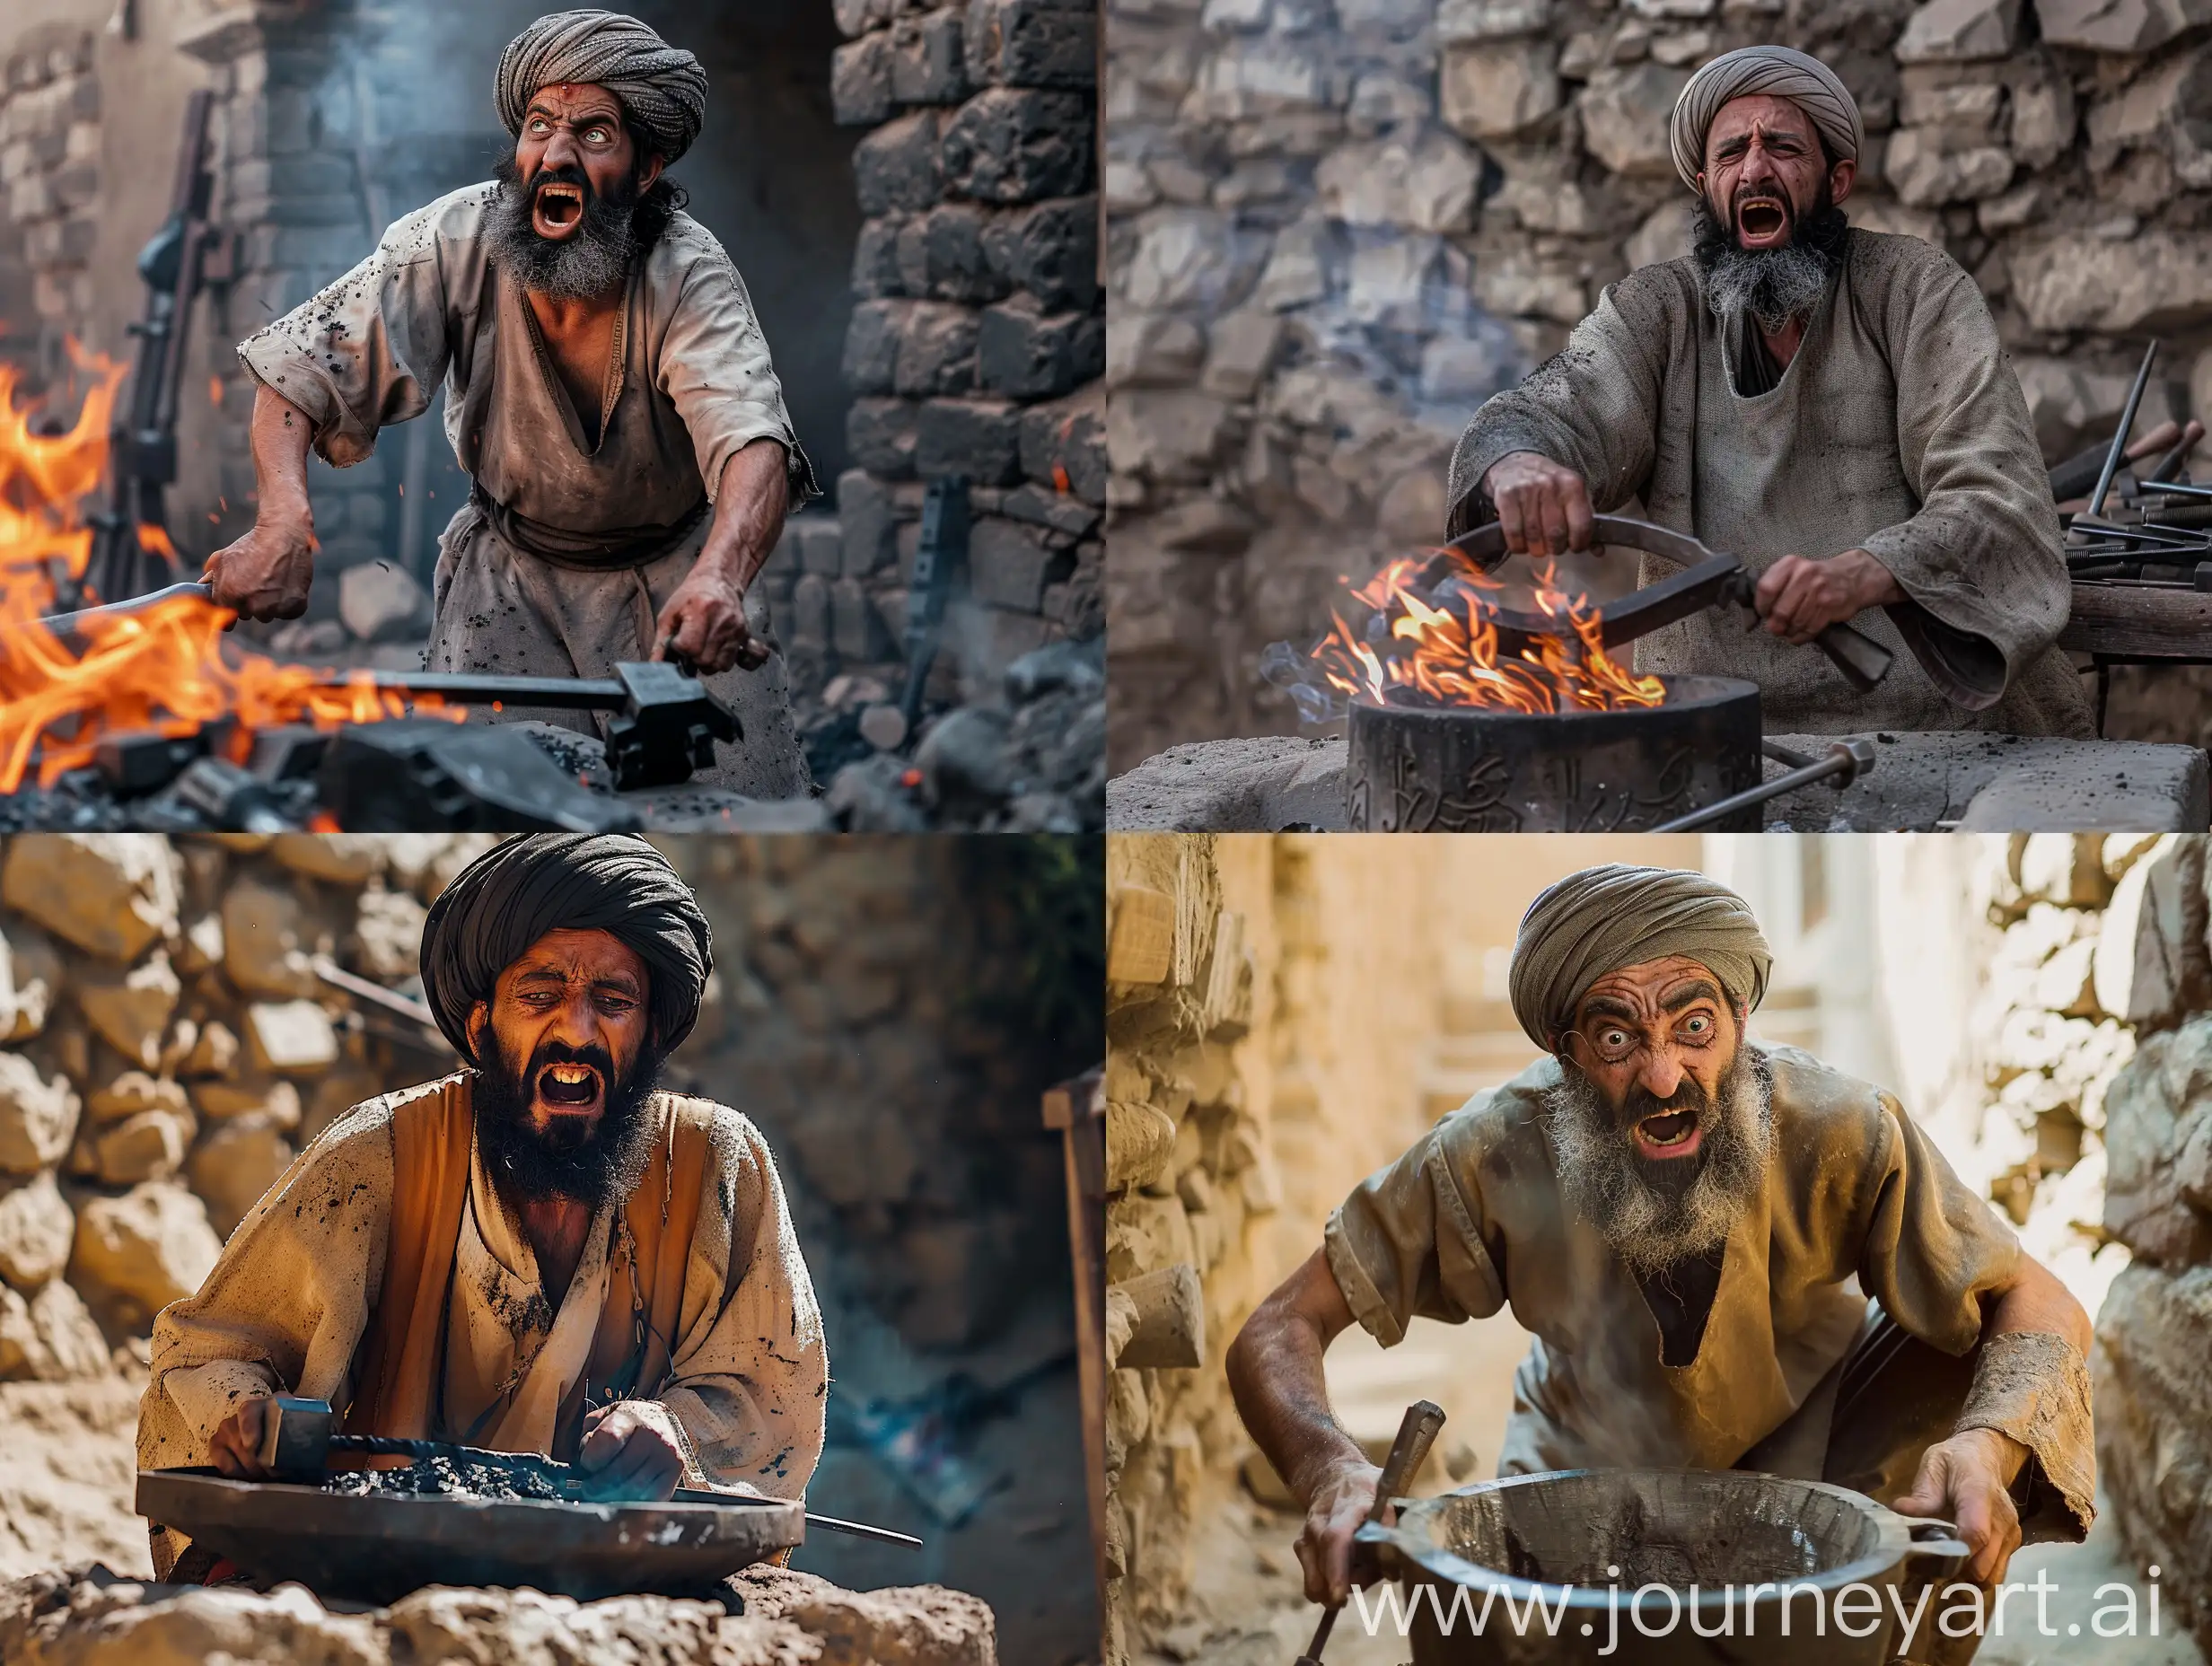 Anxious-Persian-Blacksmith-on-the-Verge-of-Falling-into-the-Forge